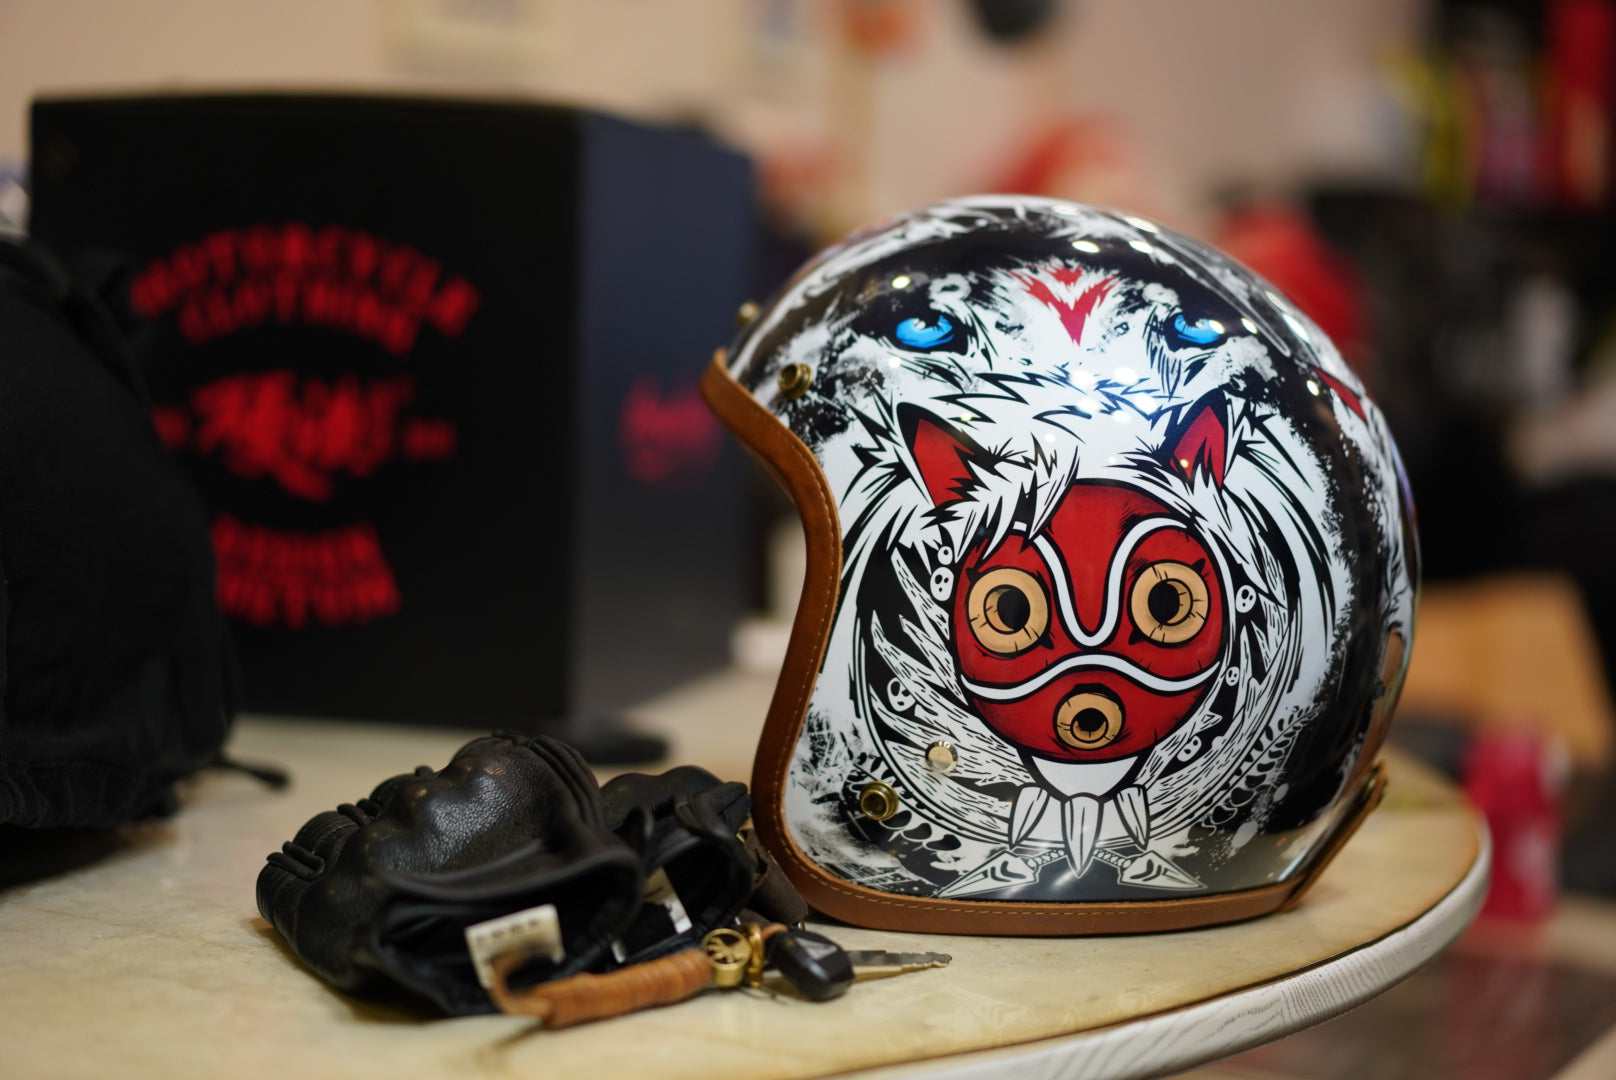 The Essential Guide to Fitting Your Motorcycle Helmet: Ensuring Safety and Comfort